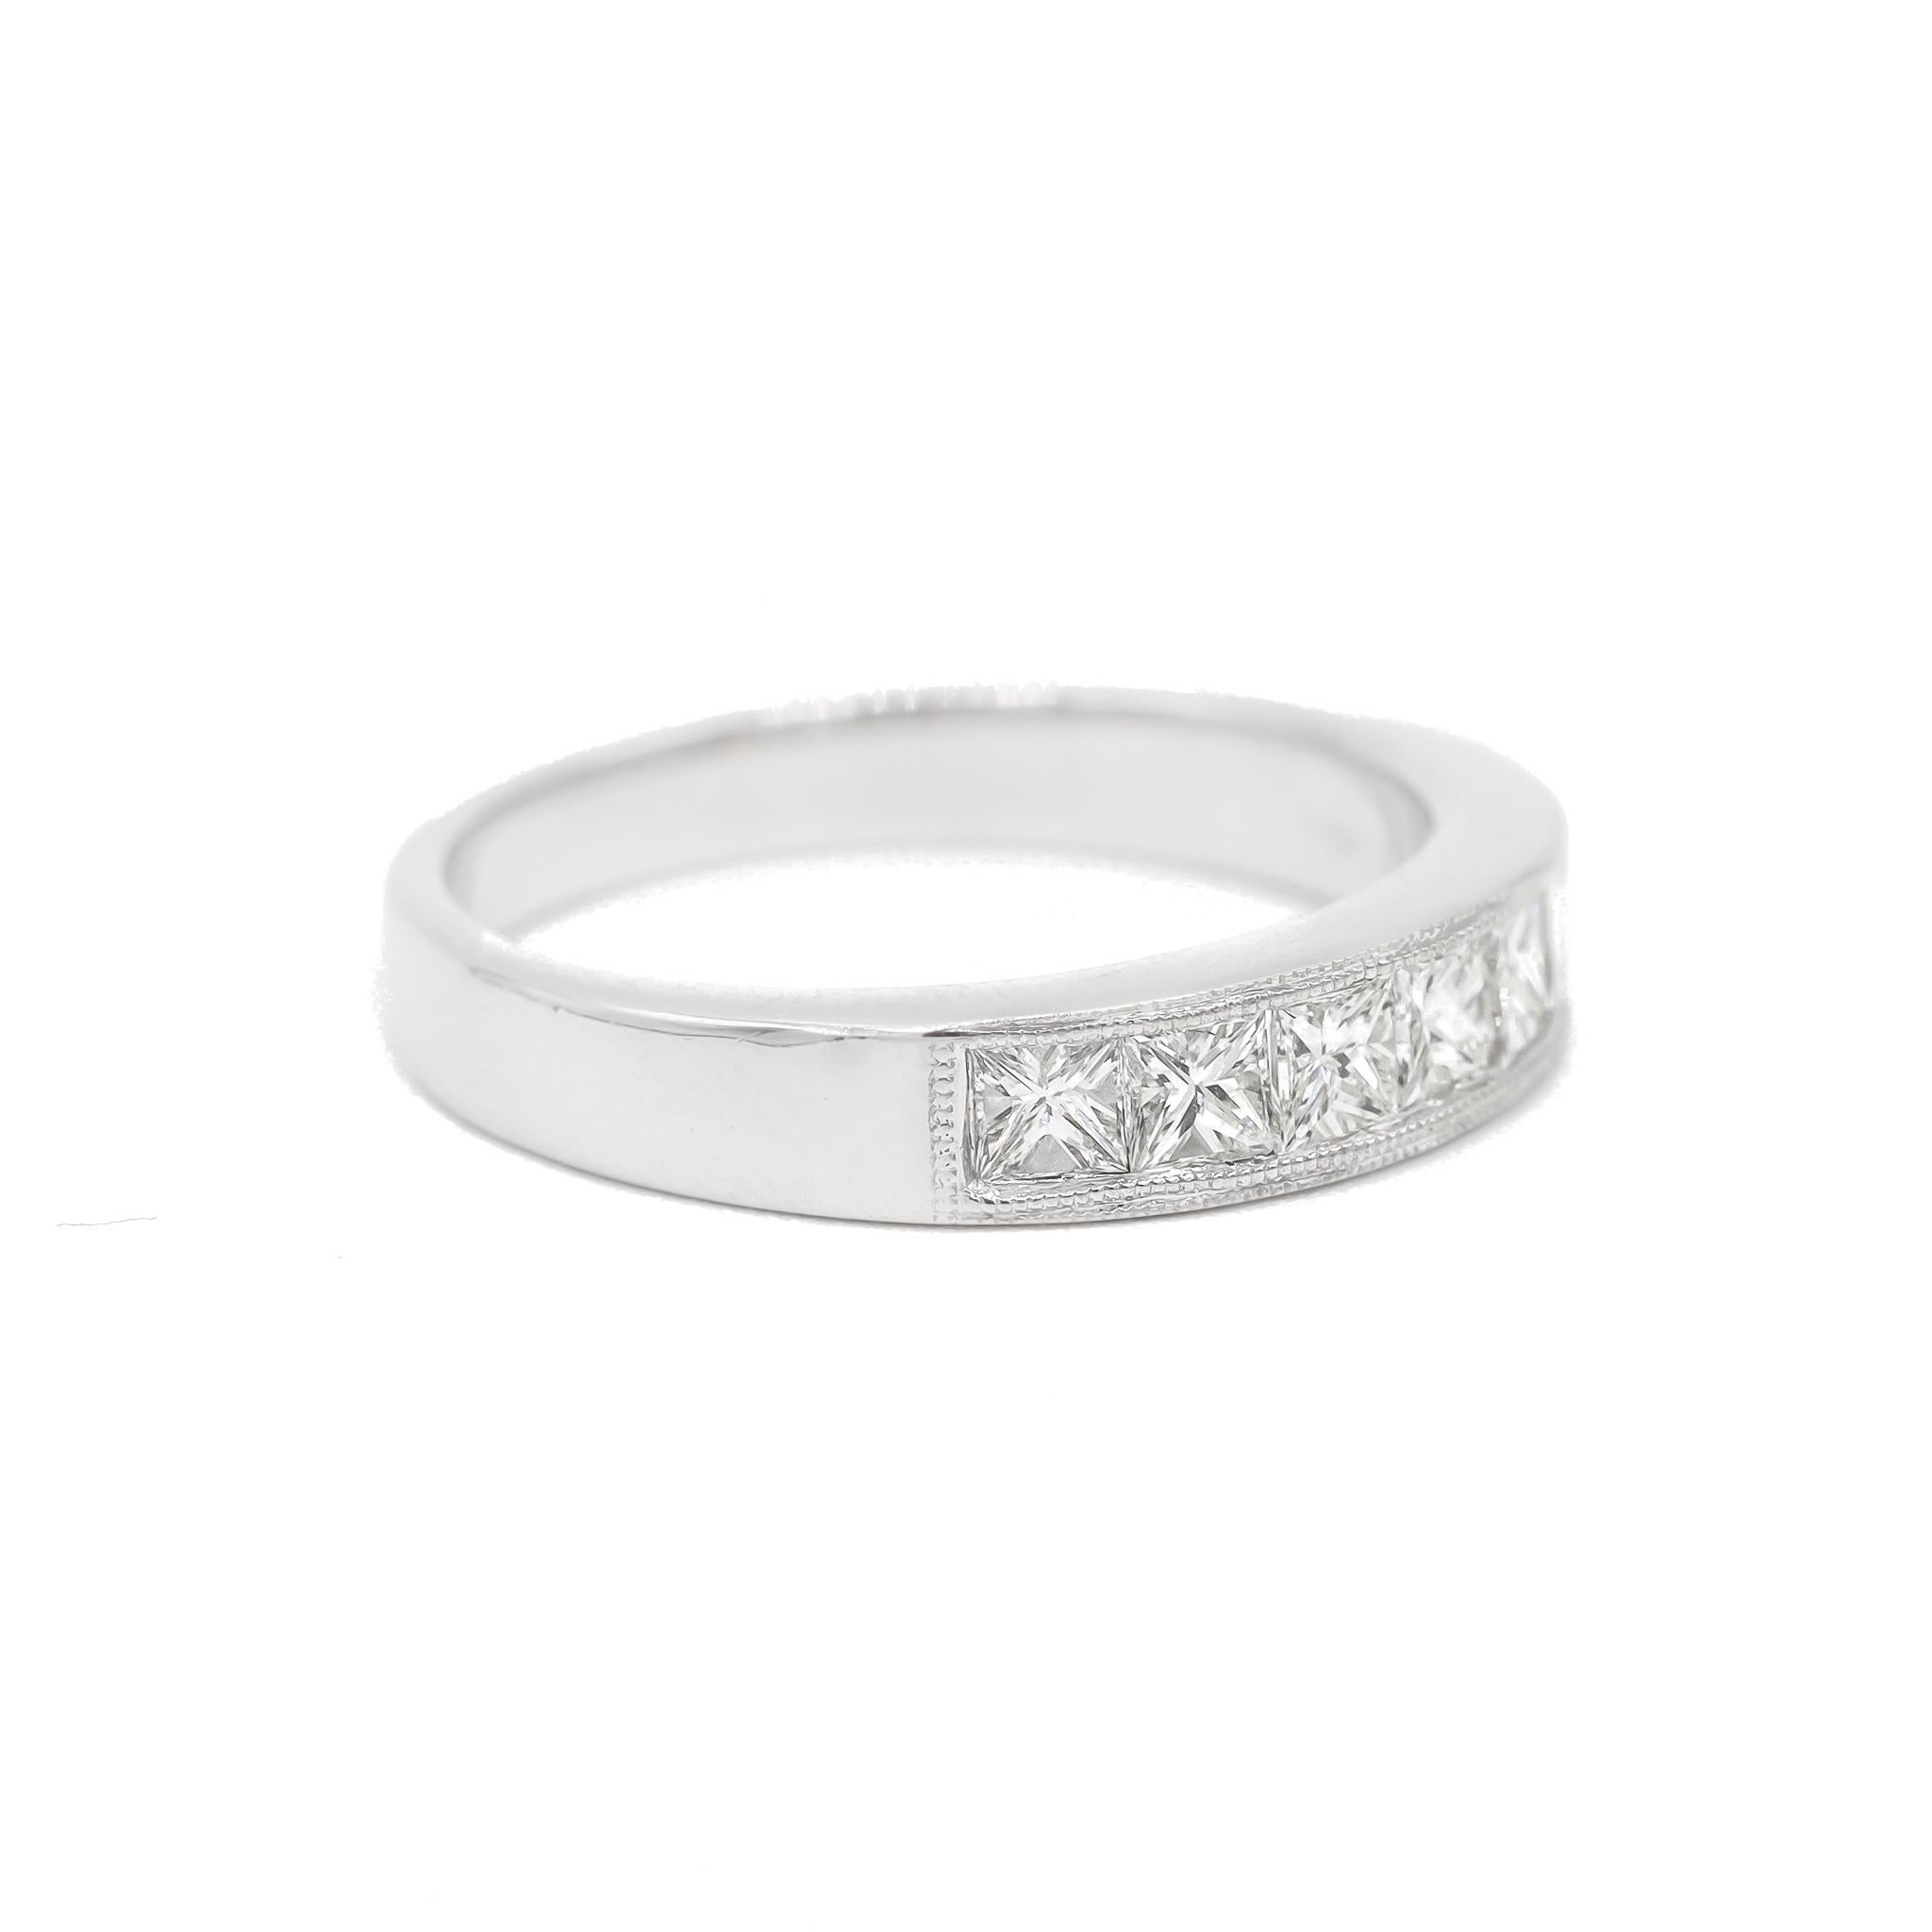 Be stunned by this astonishing 18K White Gold Diamond Ring! Weighing at around 4 grams, this piece is beautifully polished and is set with magnificent diamonds, emitting undeniable opulence like no other.

 

Elegant and classy, this beautiful piece